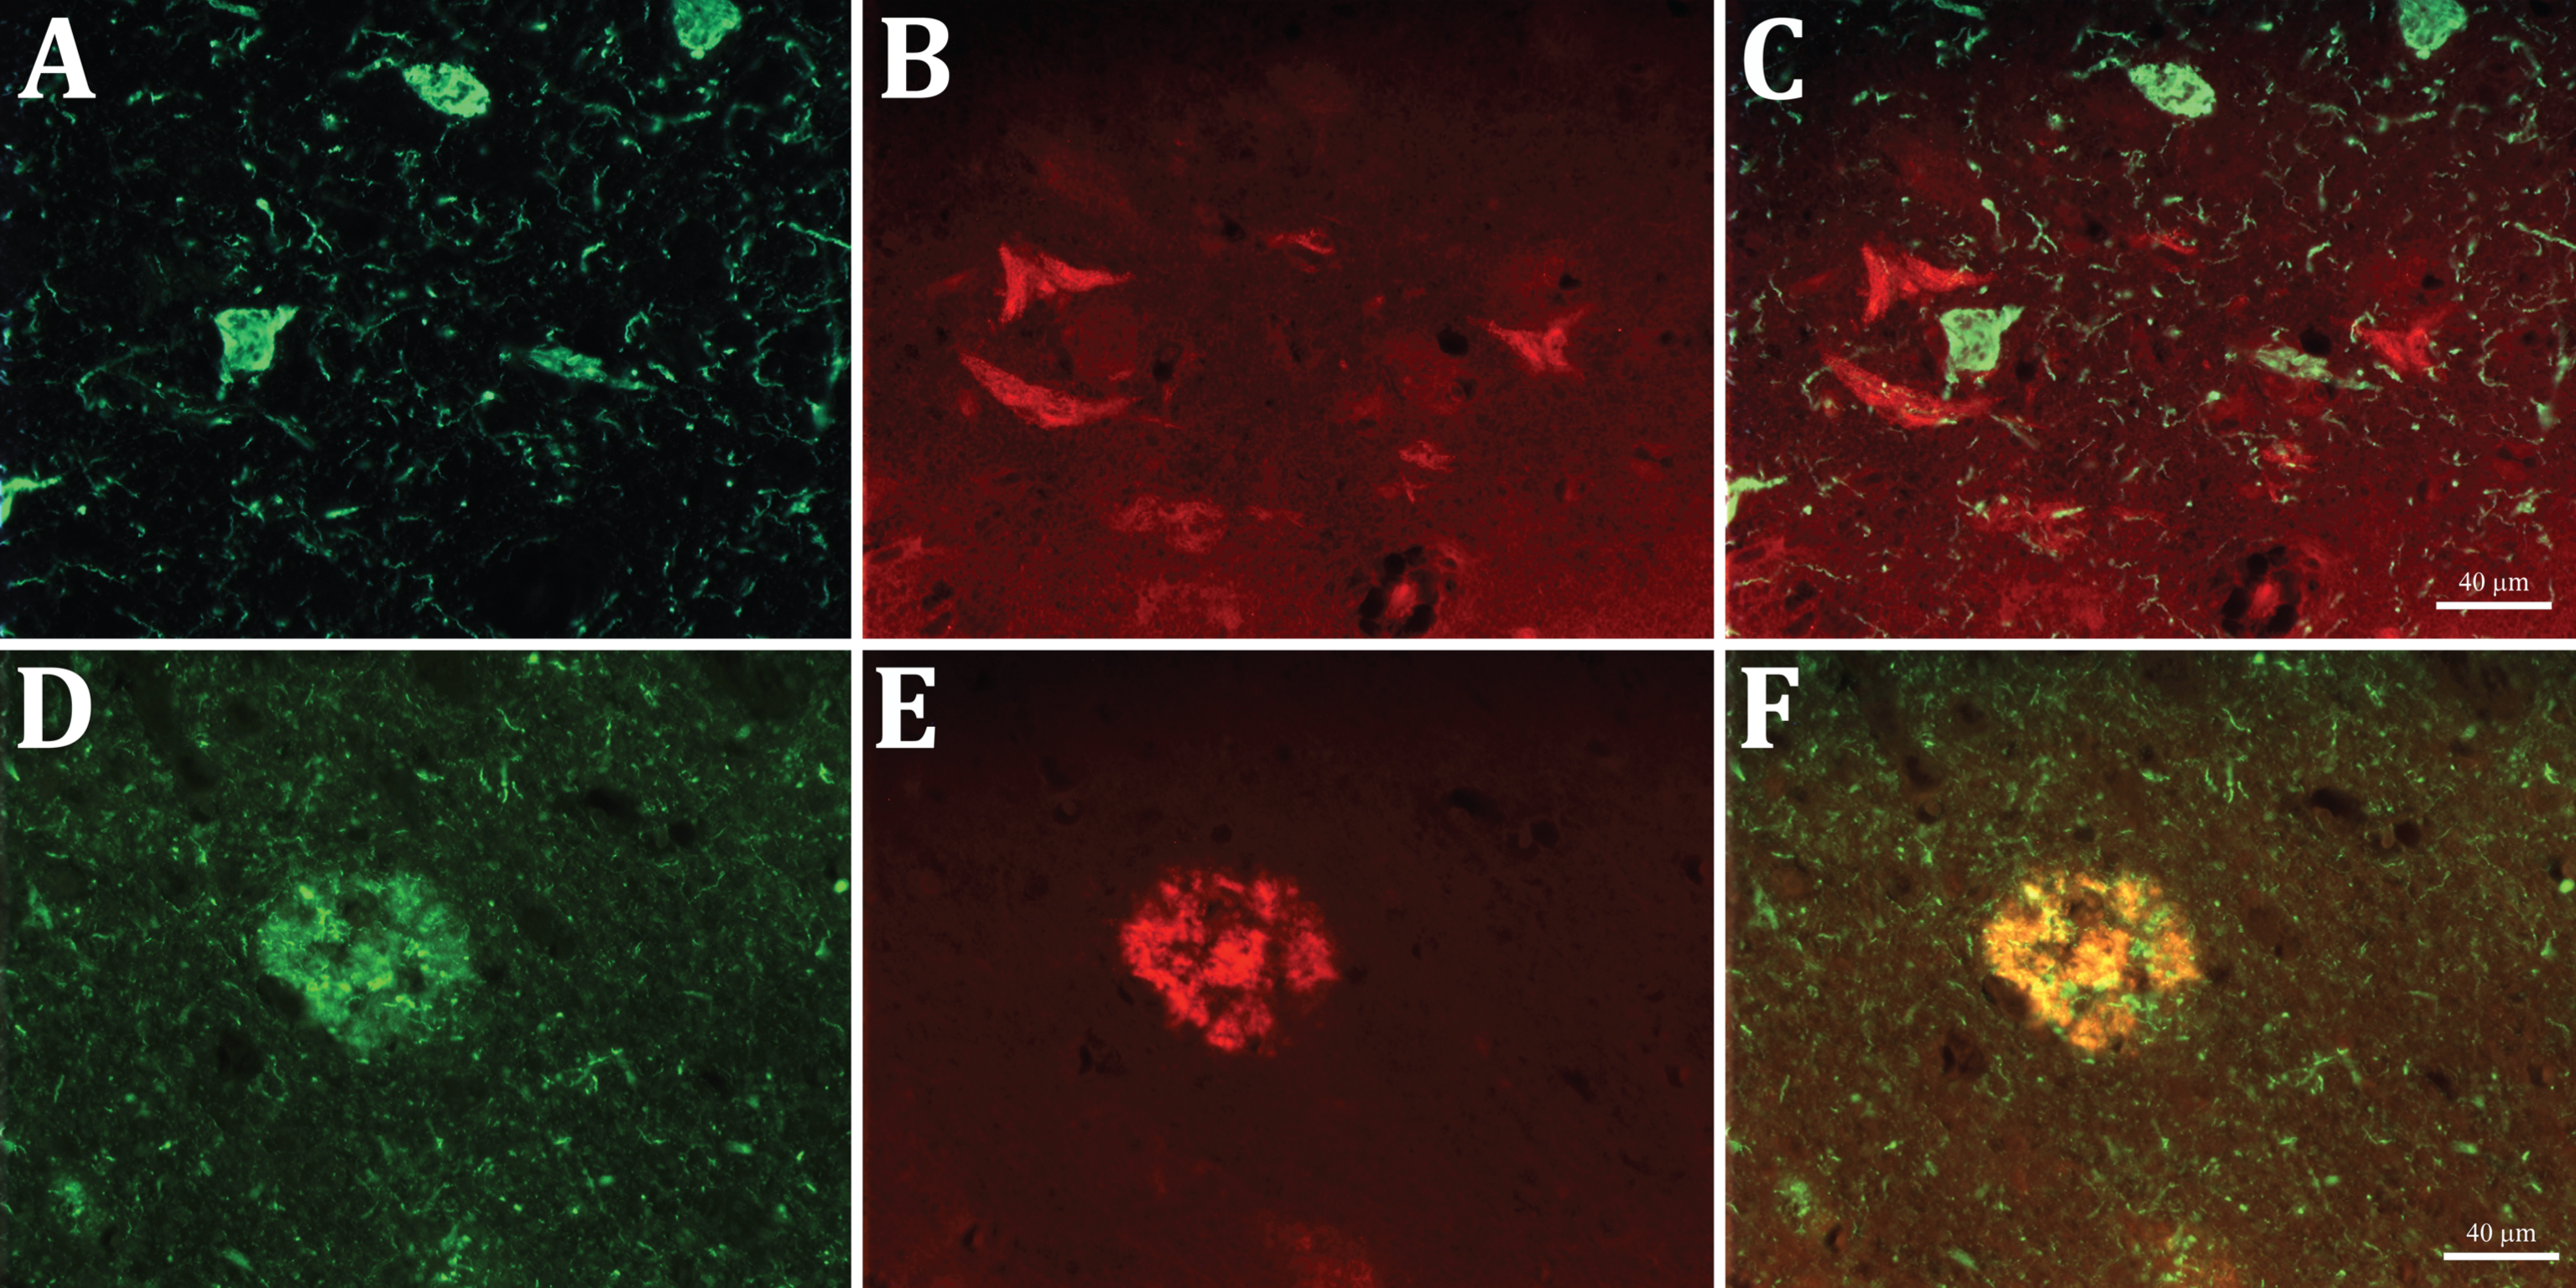 Double immunofluorescent staining with AT8 anti-tau (green, A and D) and anti-Aβx-40 (red, B and E) antibodies in entorhinal cortex sections. Note that the two labels do not co-localize in the NFT profiles nor in the short threads in A and D (merged in C), whereas both co-localize in the senile plaques (merged in F).